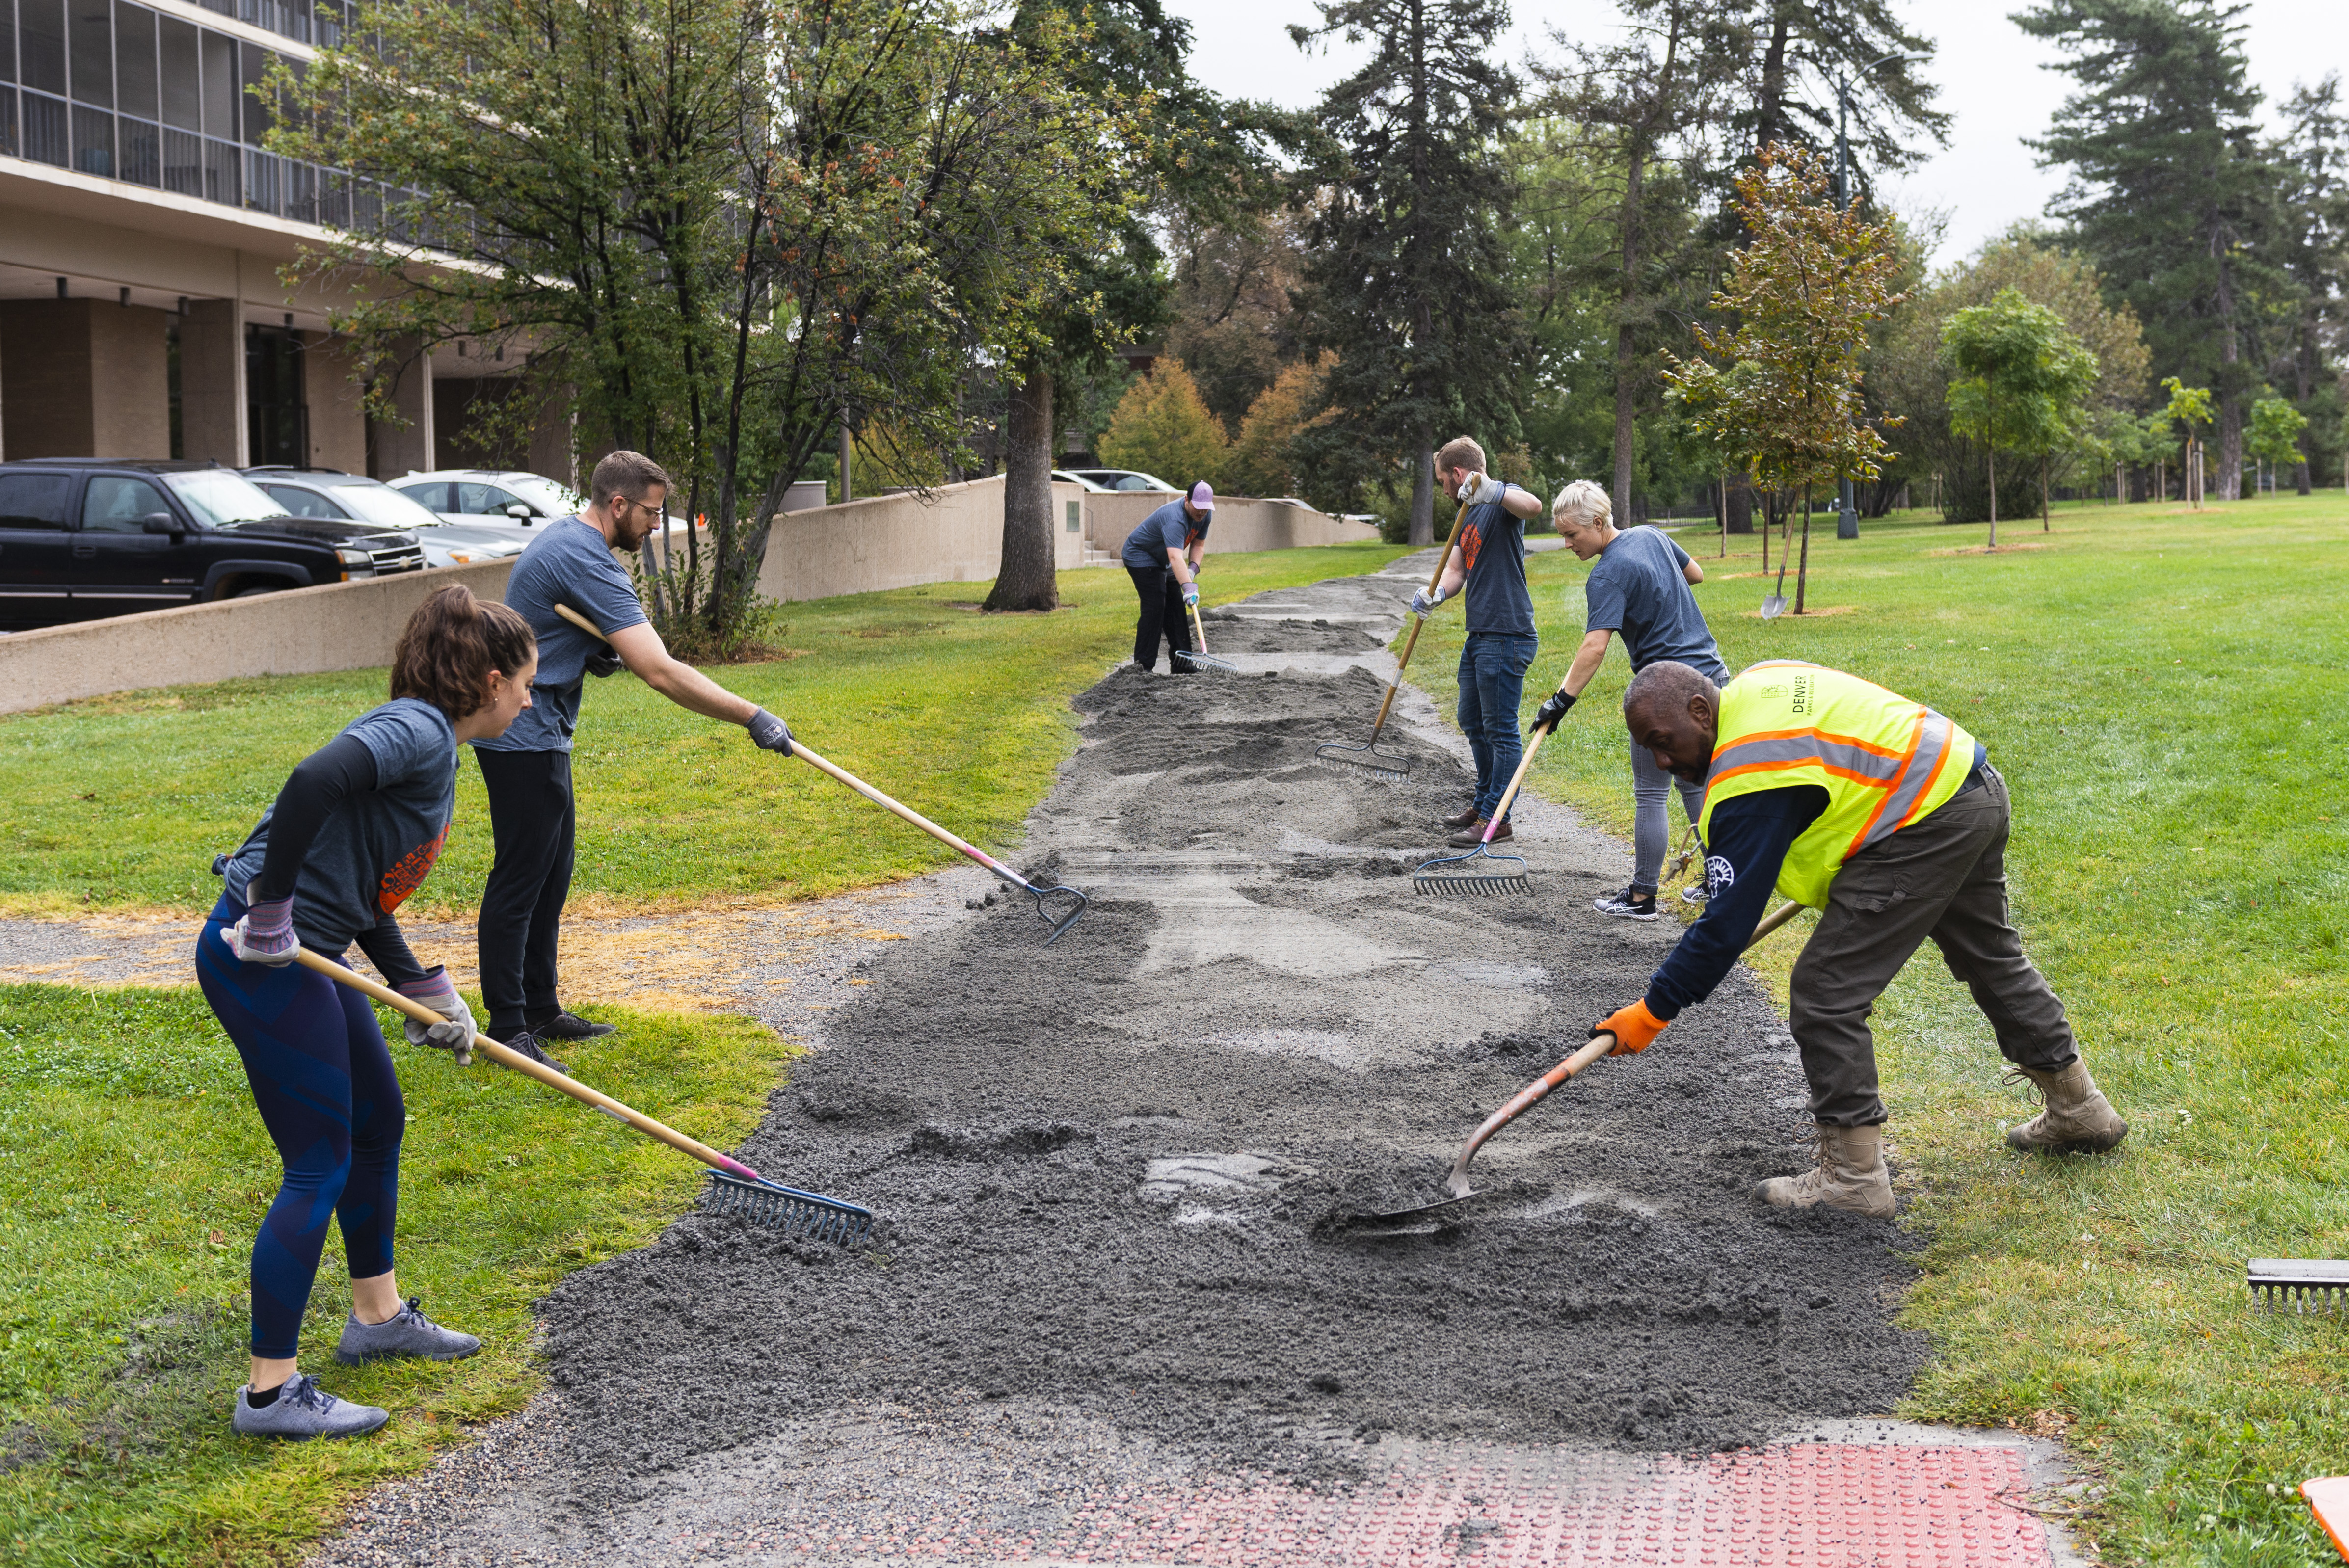 Evolve employees volunteering by building a footpath